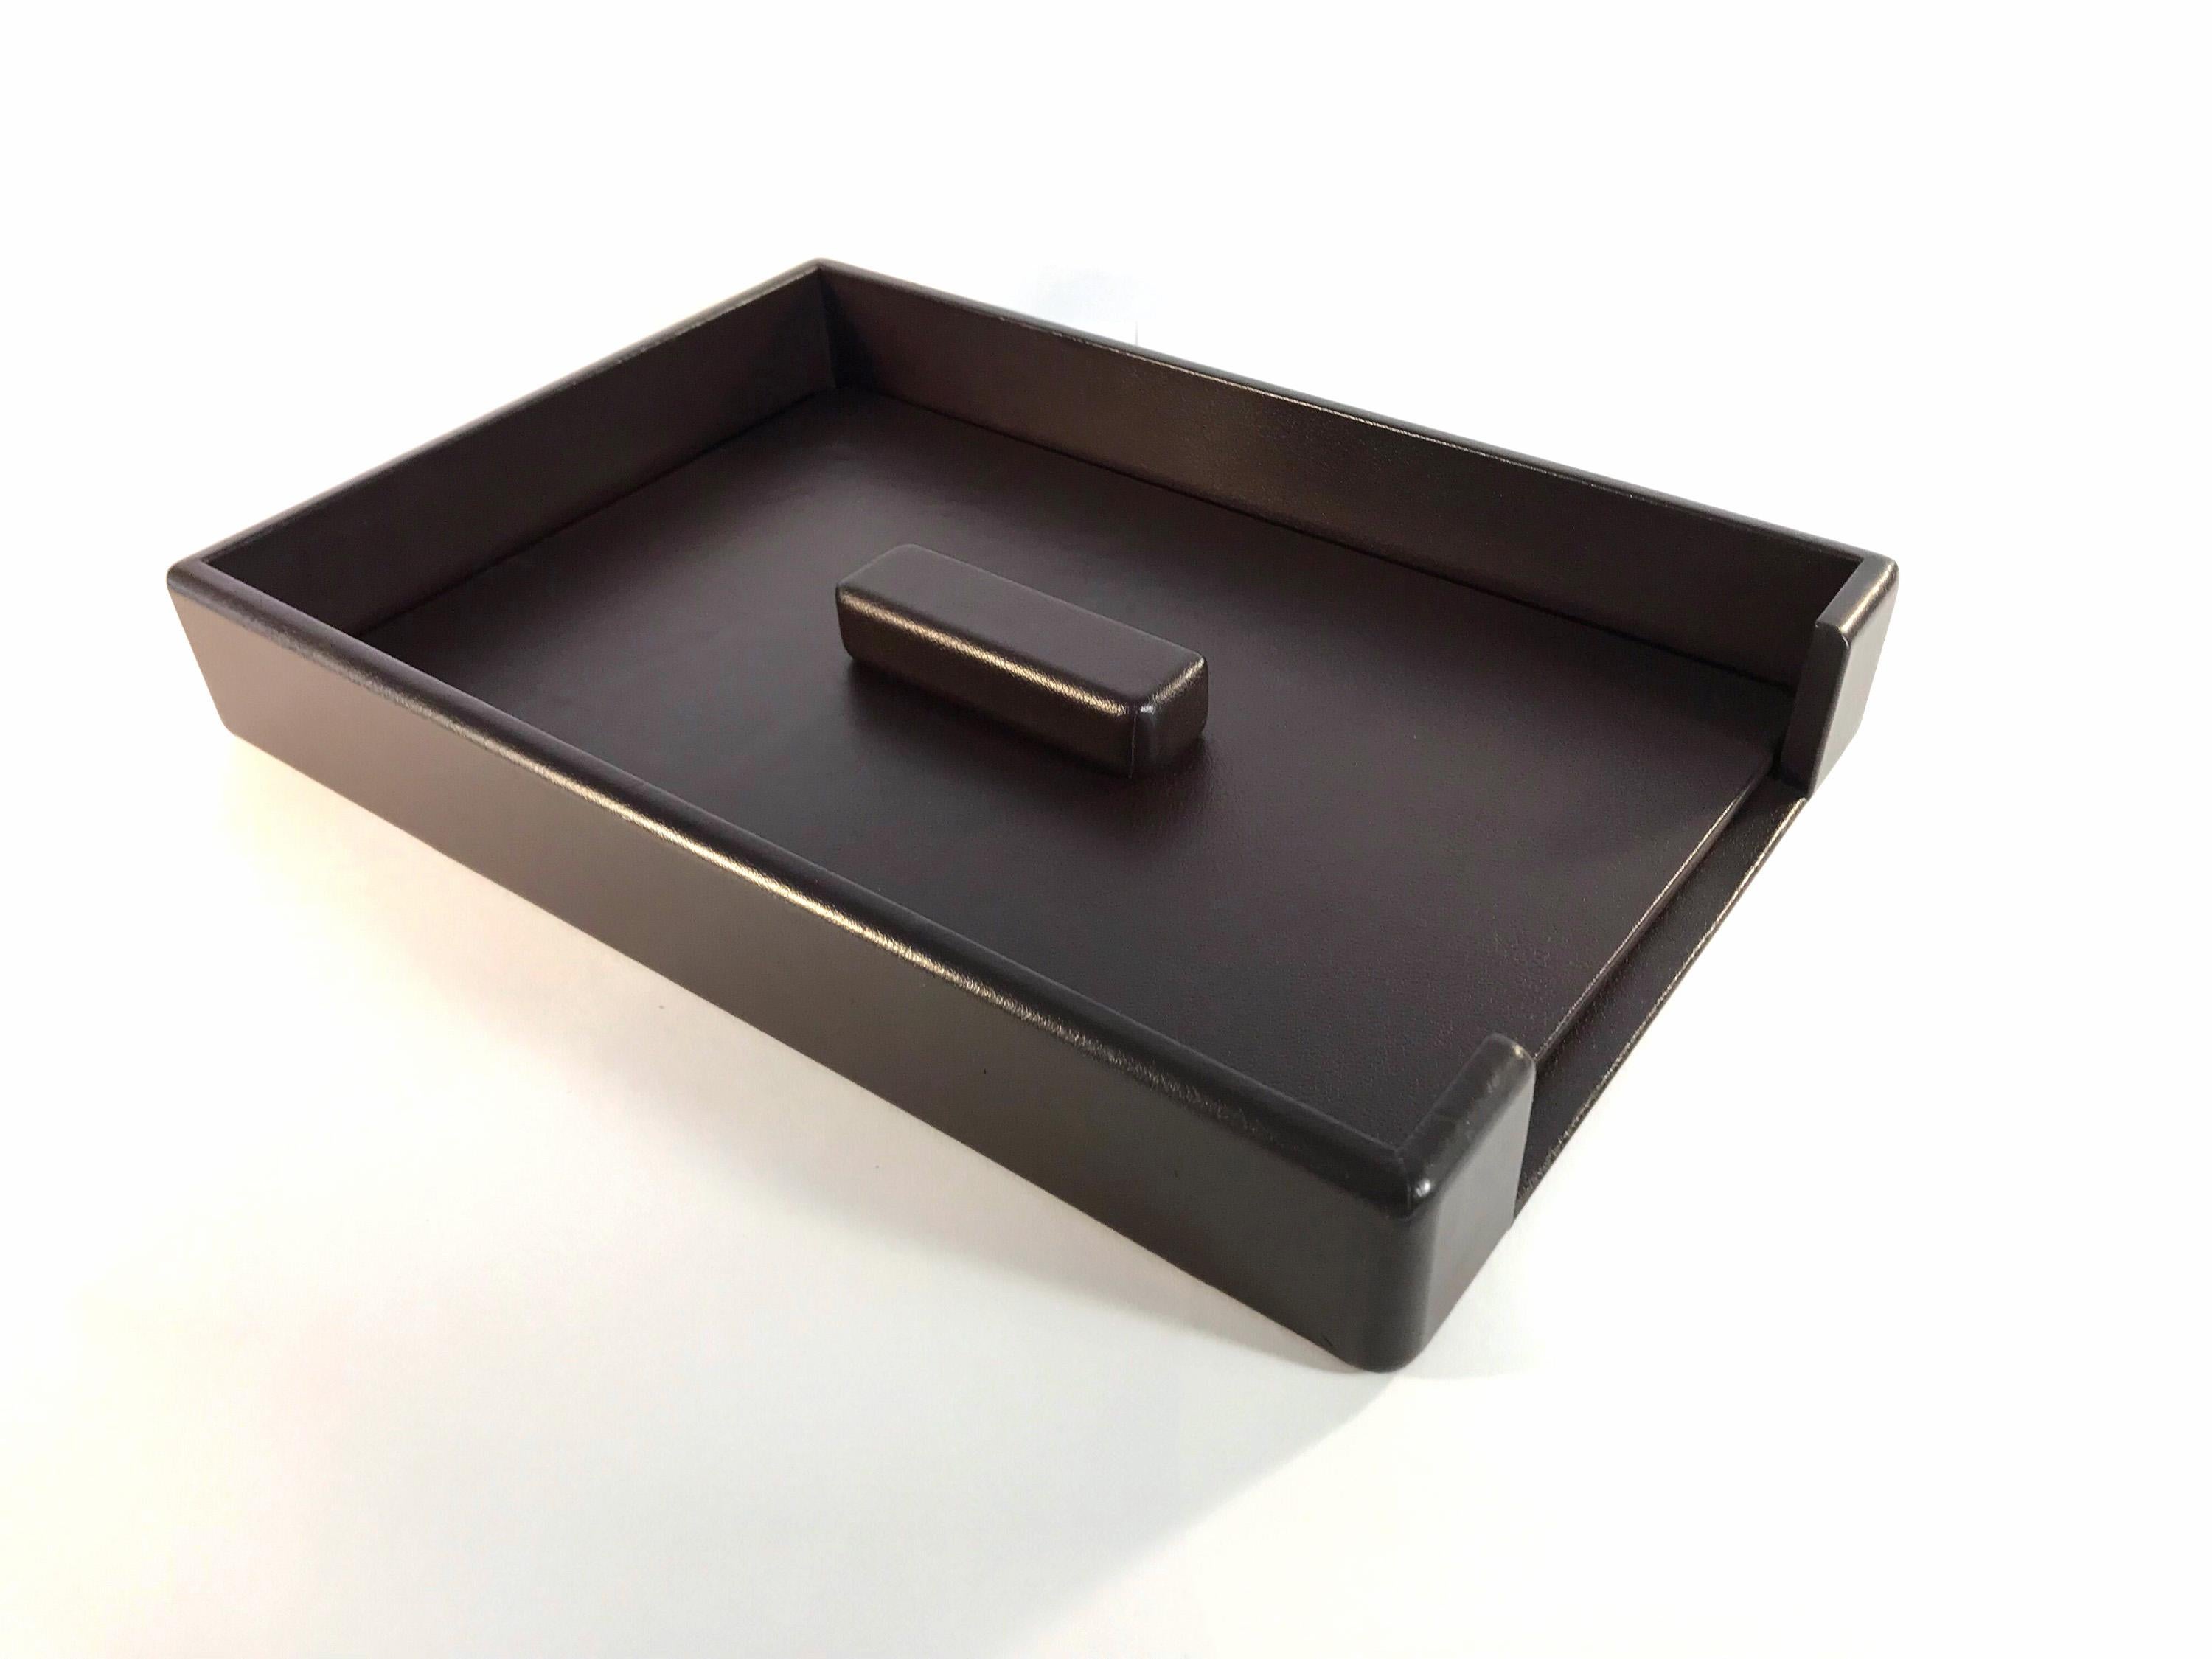 Chocolate brown leather wrapped desk tray or paper holder retailed by Knoll and manufactured by Smokador, New Jersey.

Measures: 15.75